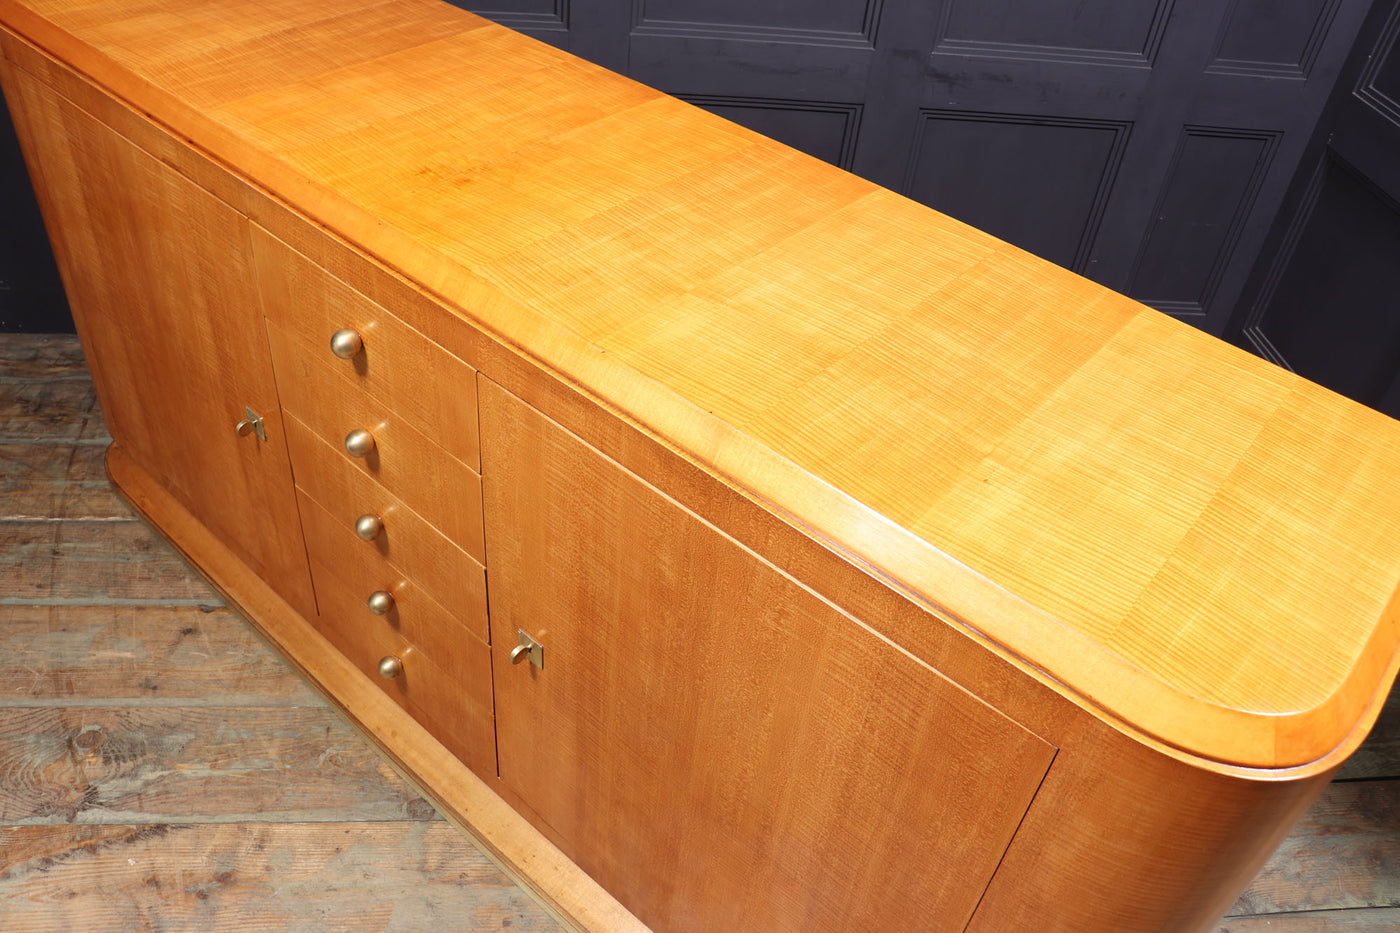 French Art Deco Sideboard in Sycamore